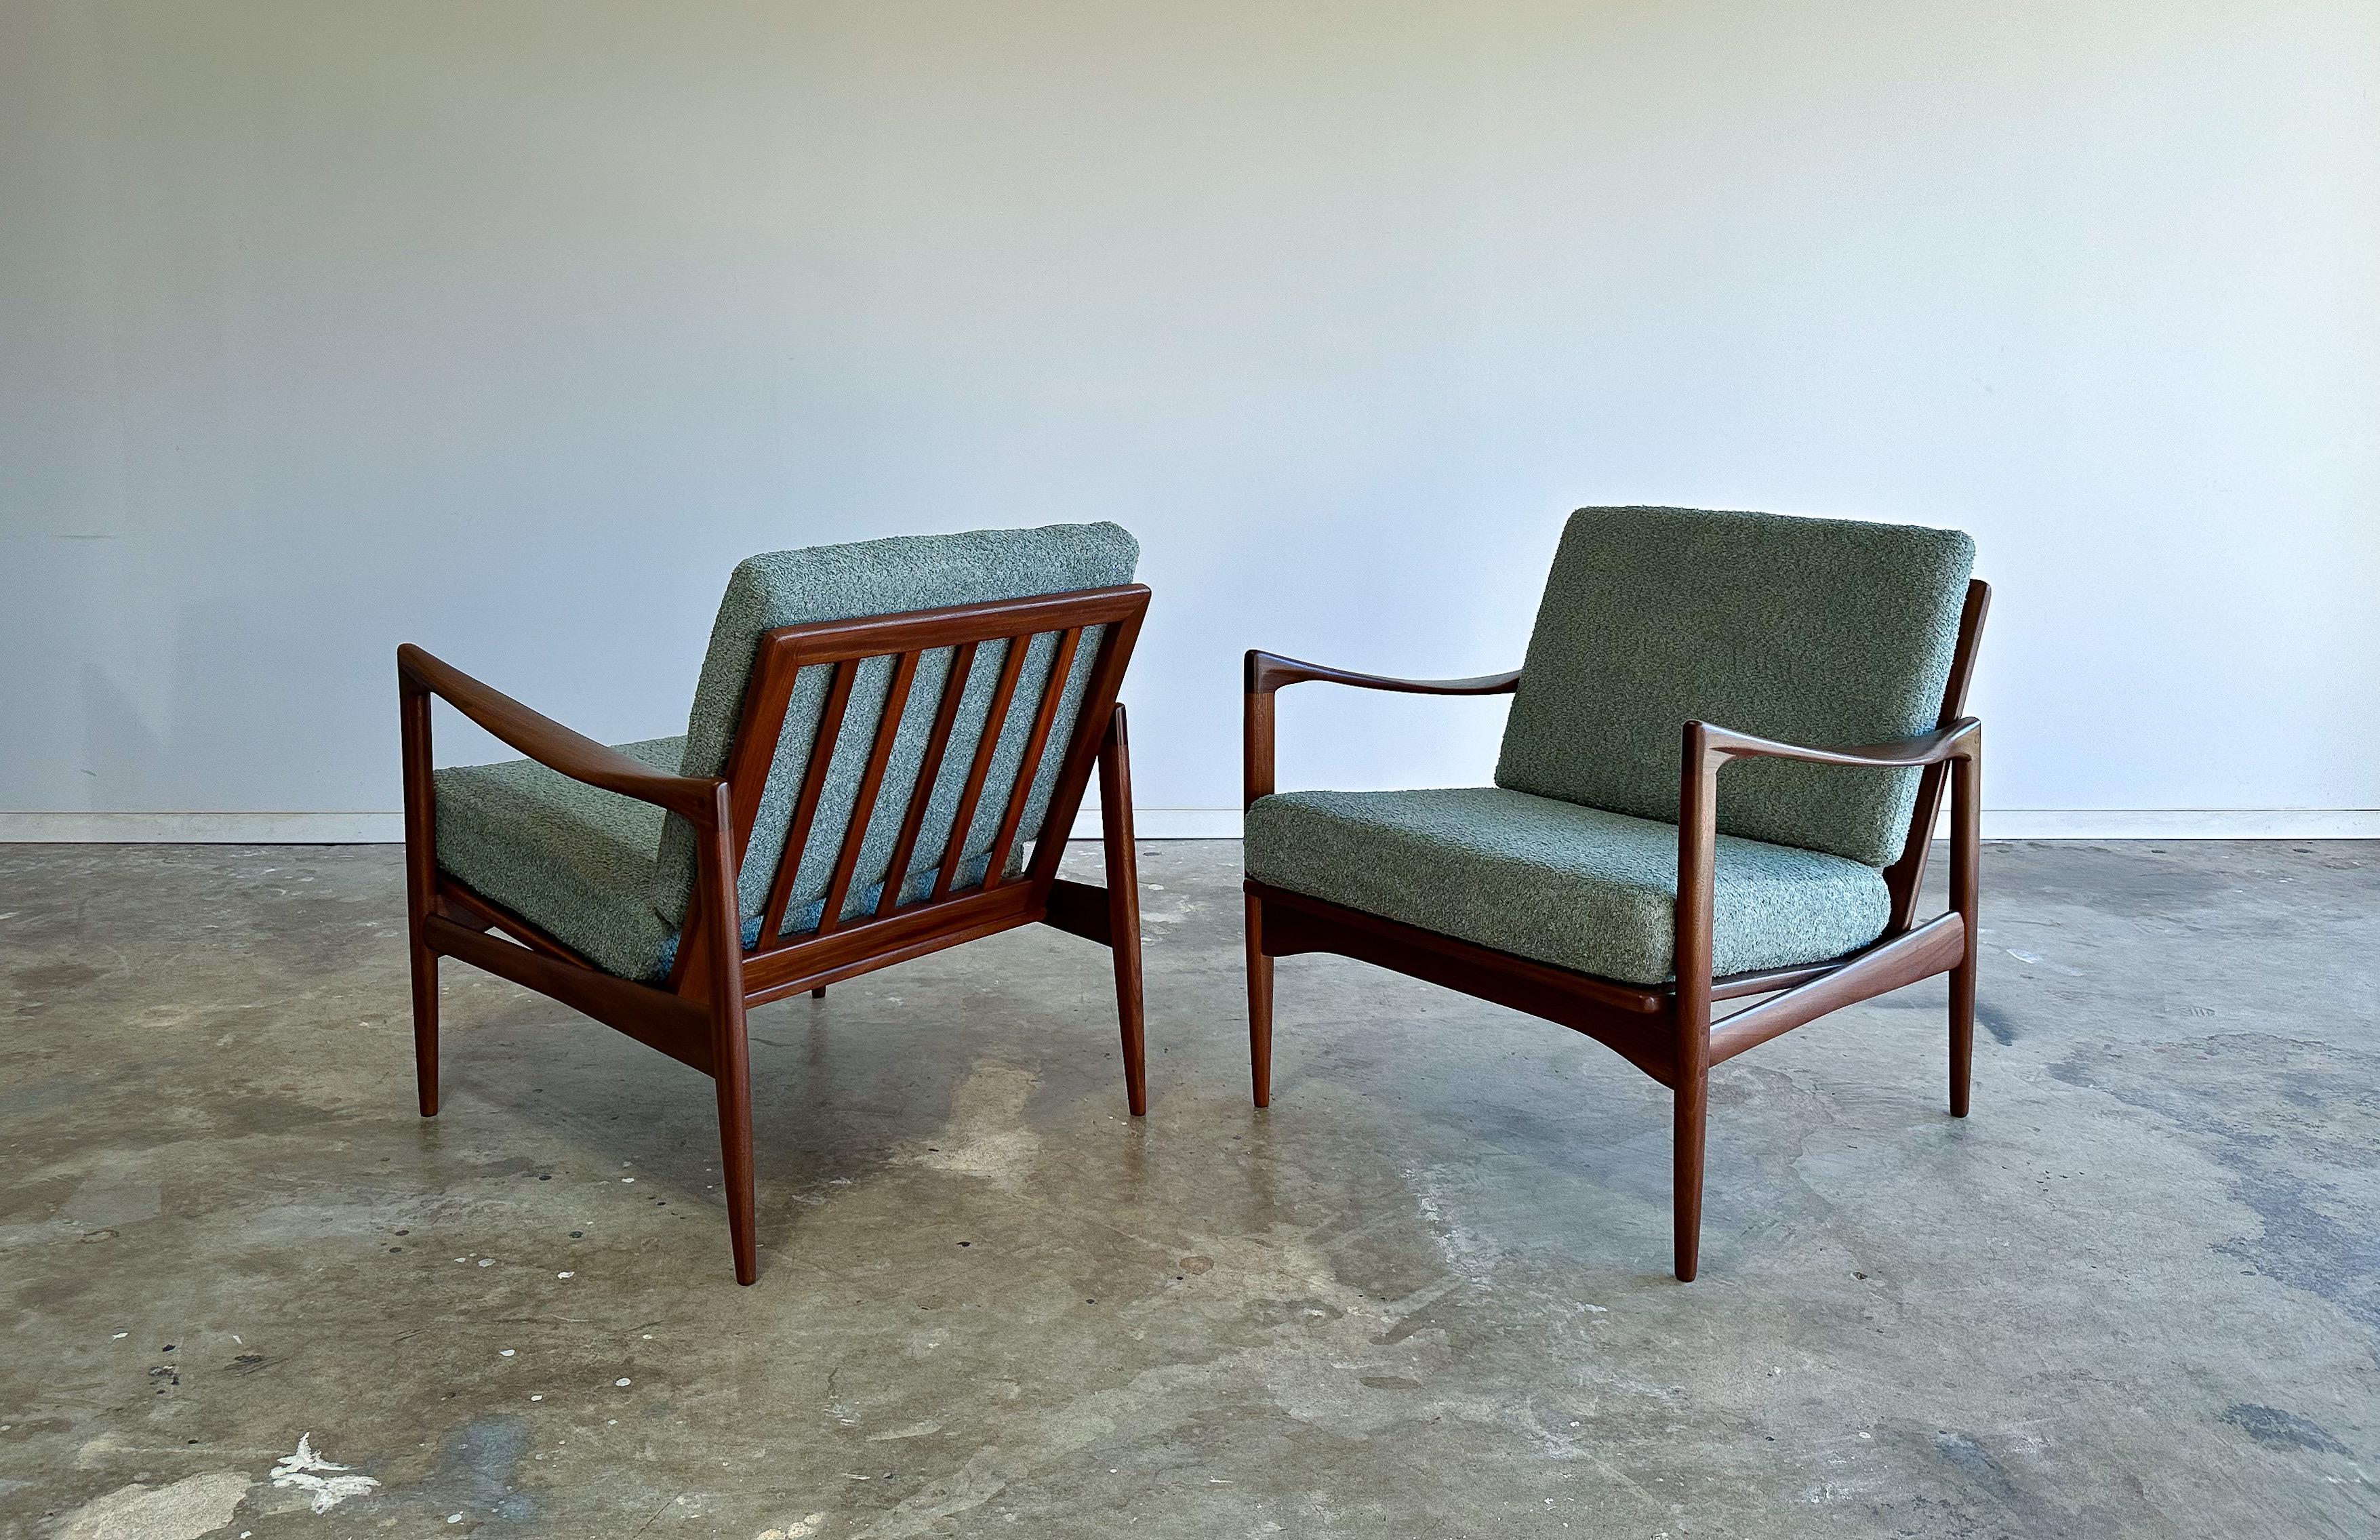 Offered is a beautiful pair of lounge chairs designed by Ib Kofod Larsen and made by Illums Bolighus circa 1960.

Referred to as the Kandidaten or Candidate model, these chairs feature solid afromosia teak construction with lovely sculpted armrests.